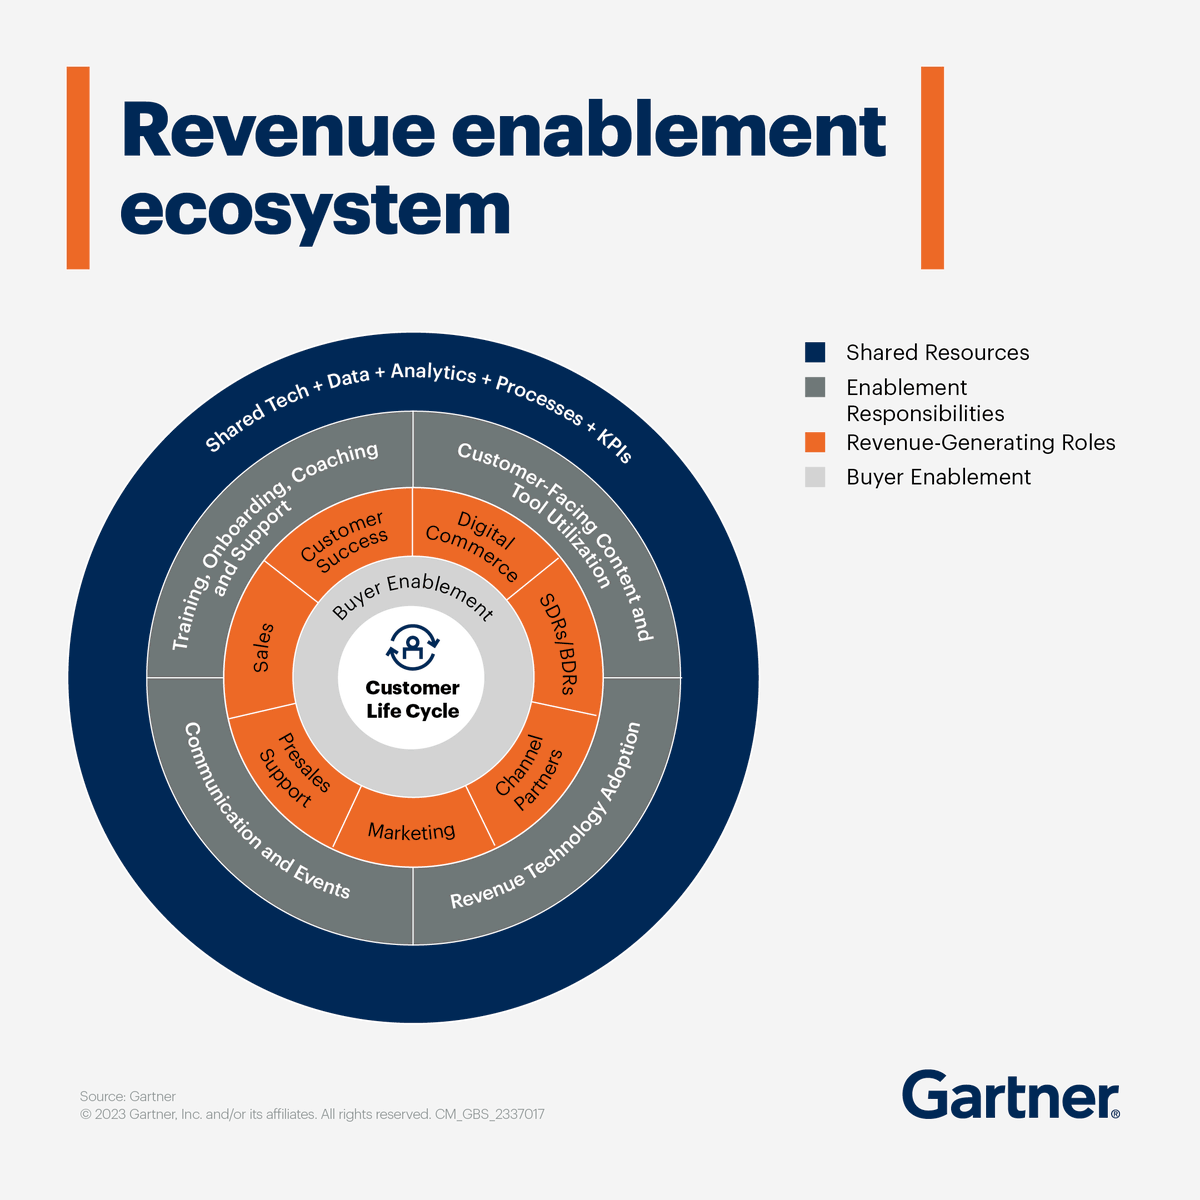 #IN Progressive enablement leaders are expanding their lens to align to the entire revenue generation process to stay relevant and outpace competition. 

Use our guide to start your journey 👉 gtnr.it/43qi6zh #GartnerSales #SalesEnablement